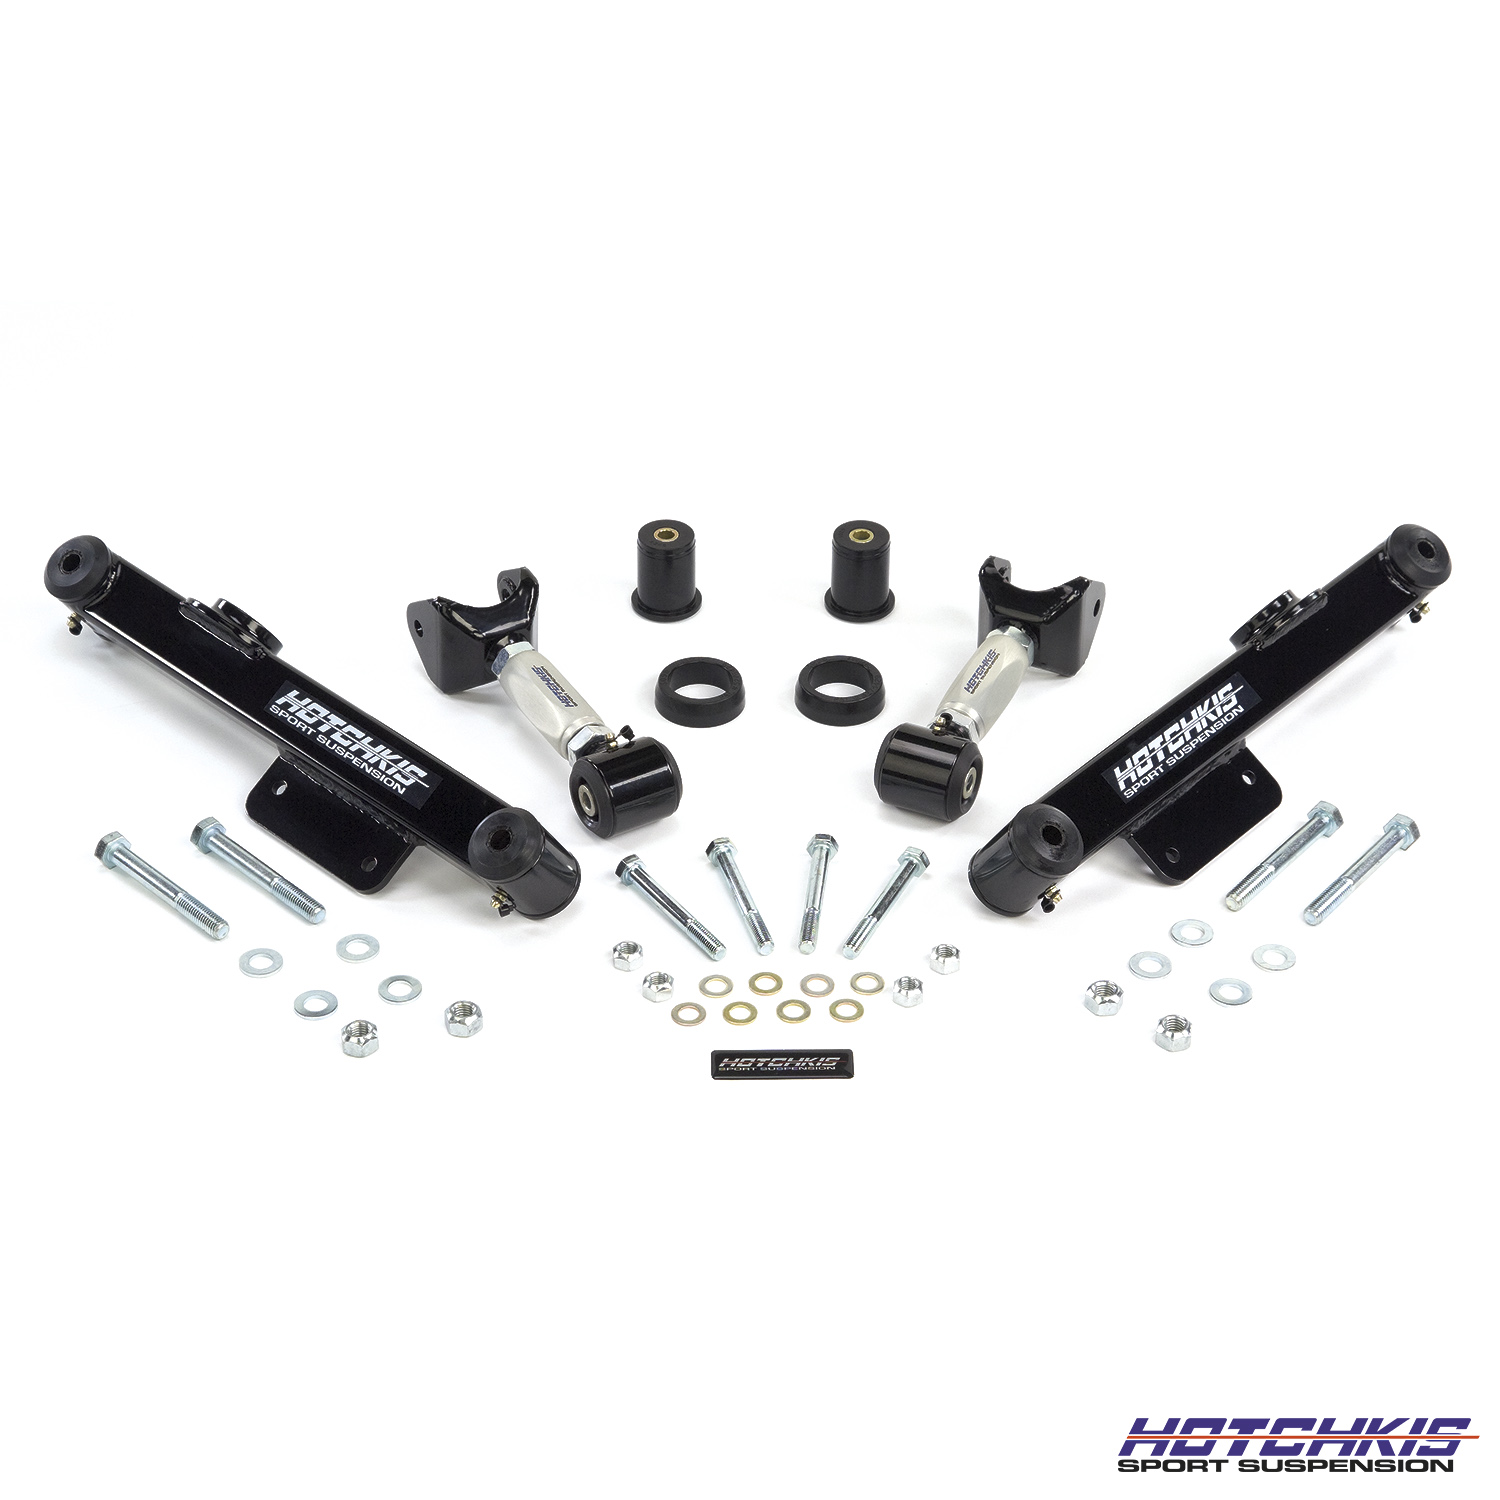 1979-98 Ford Mustang Hotchkis Suspension Adjustable Suspension Package